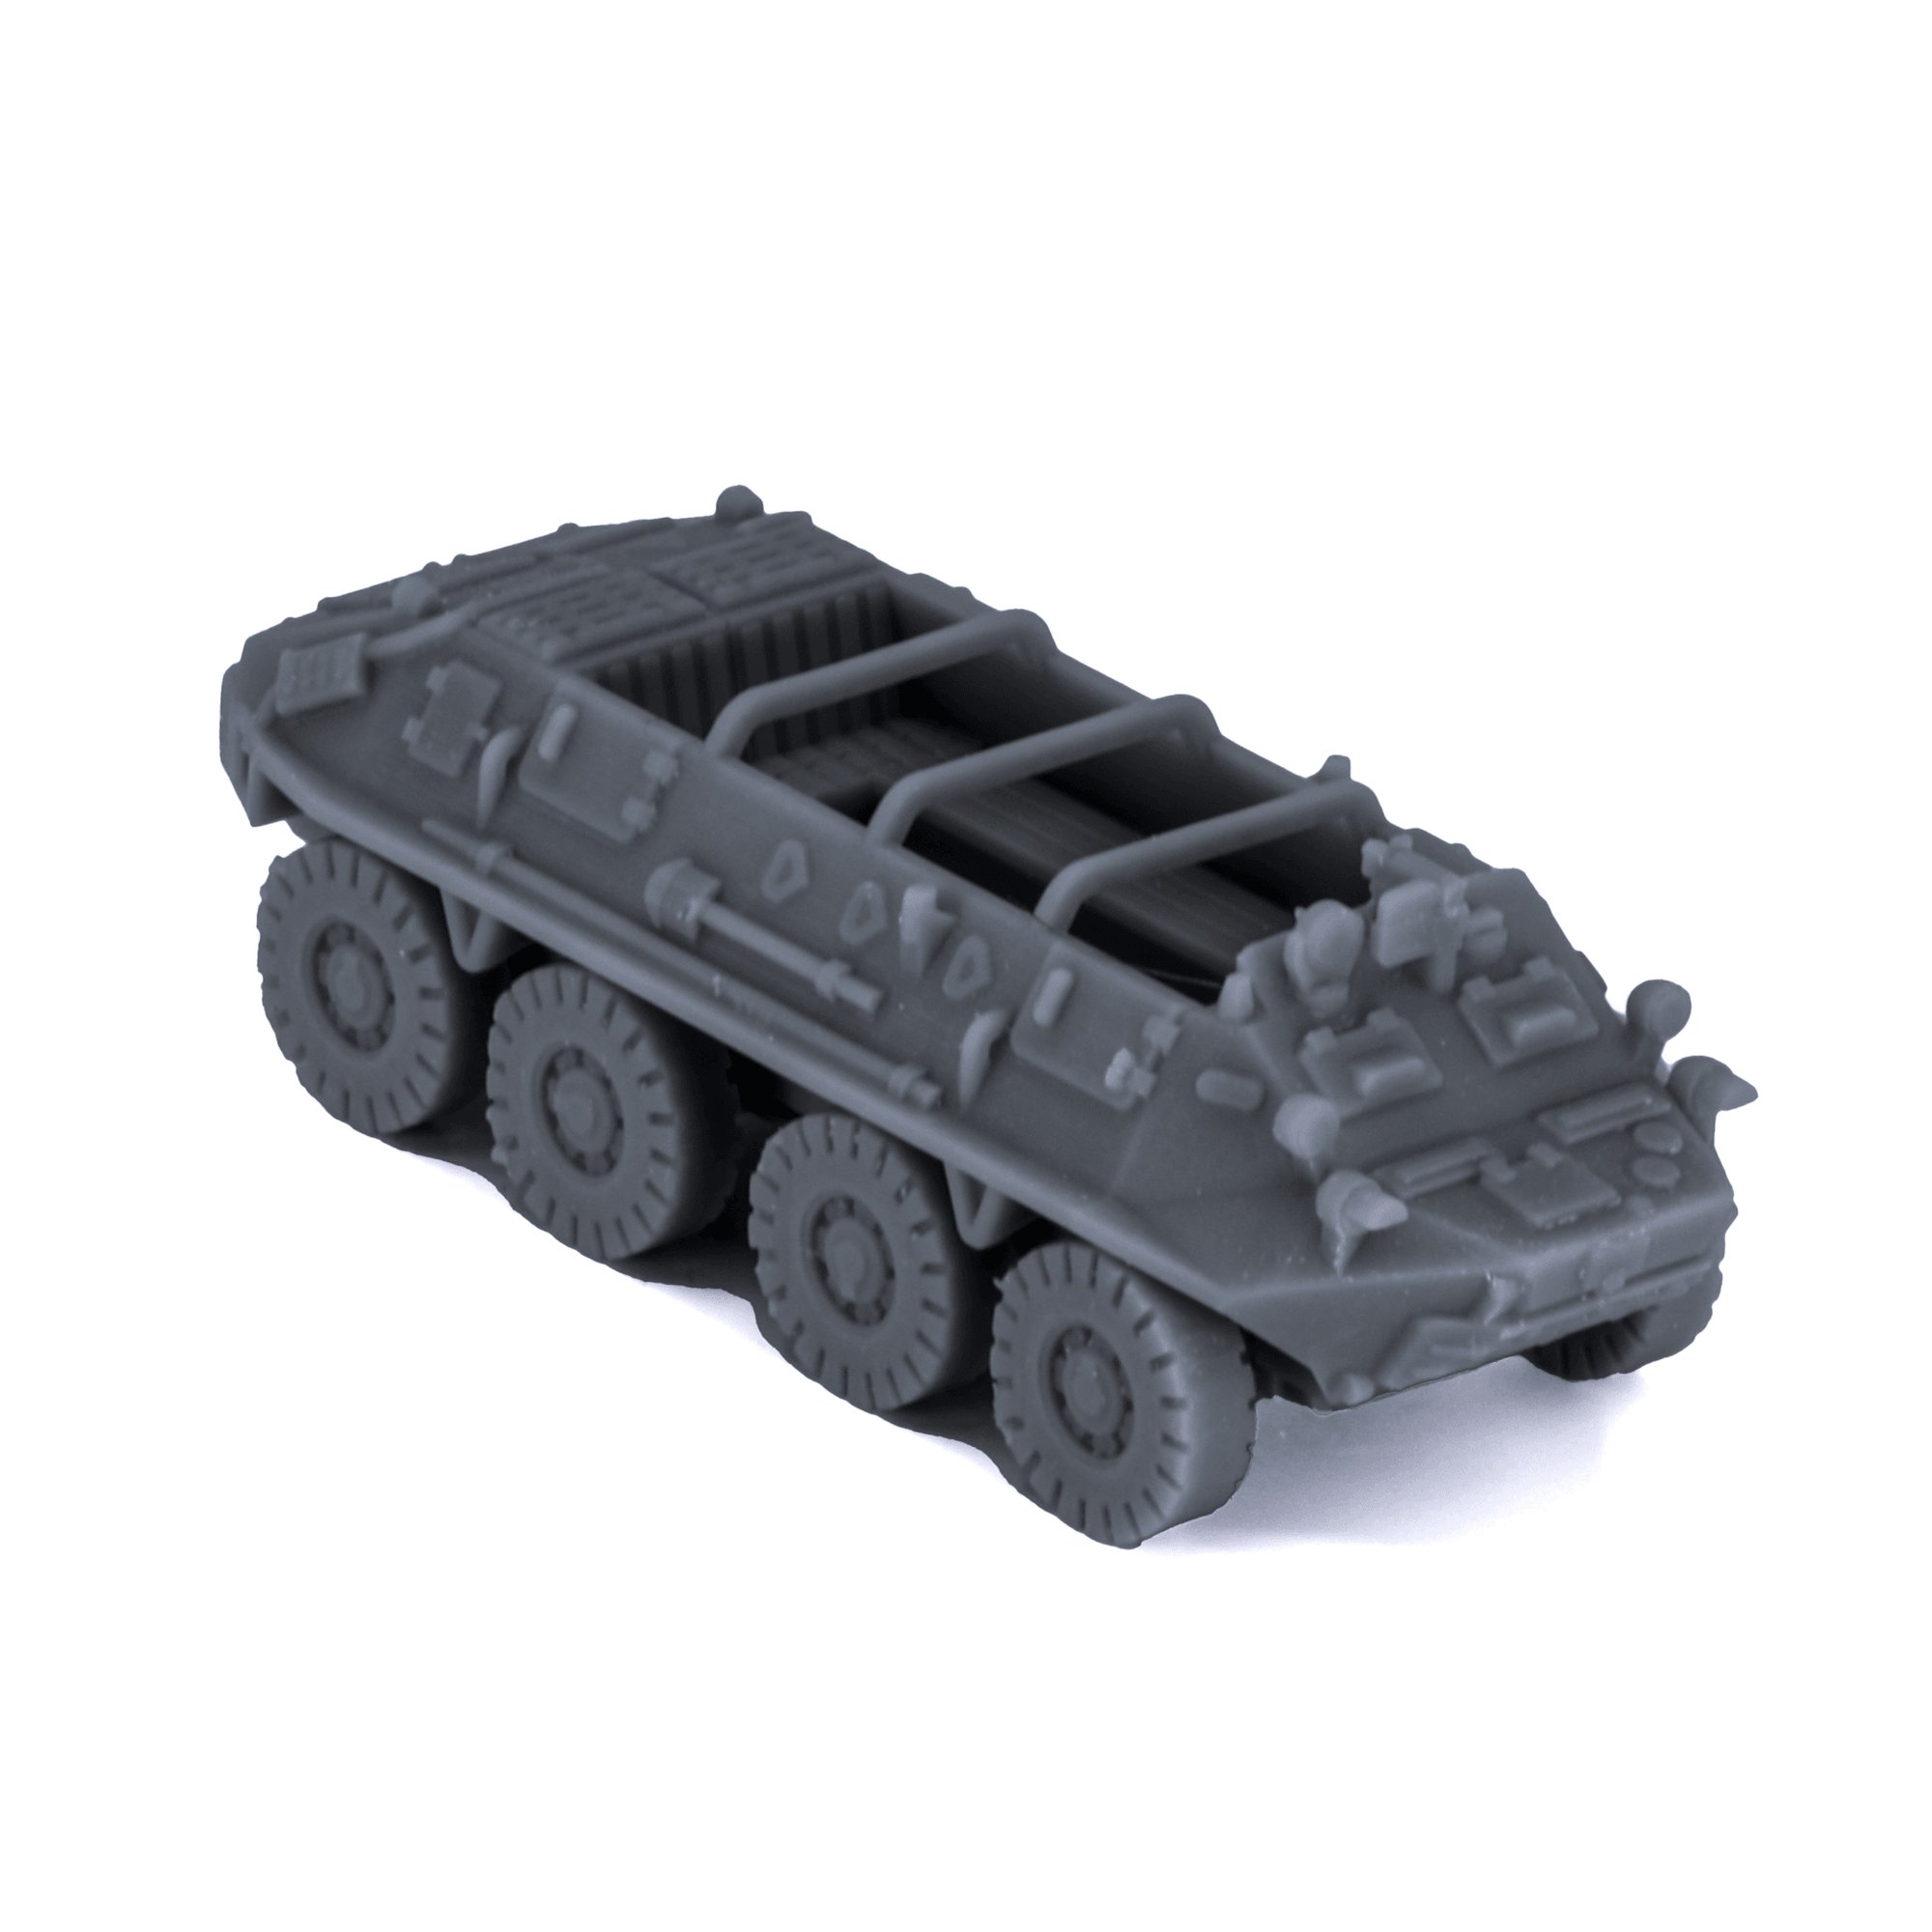 BTR-40P Open with MG - Alternate Ending Games - axis-and-allies